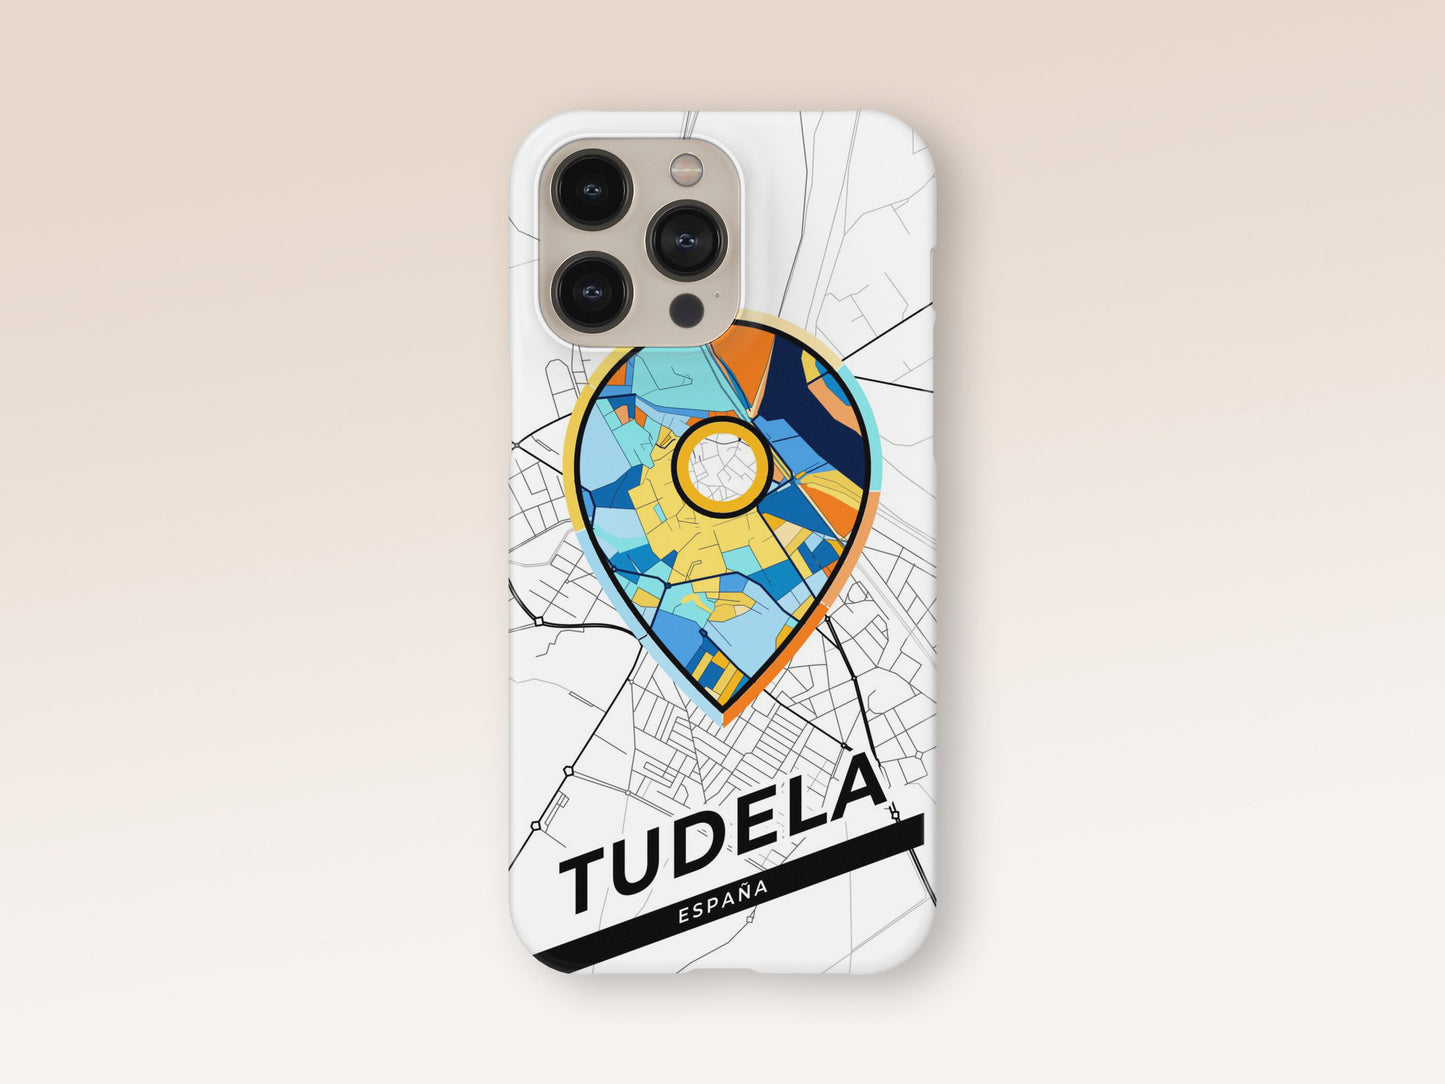 Tudela Spain slim phone case with colorful icon 1